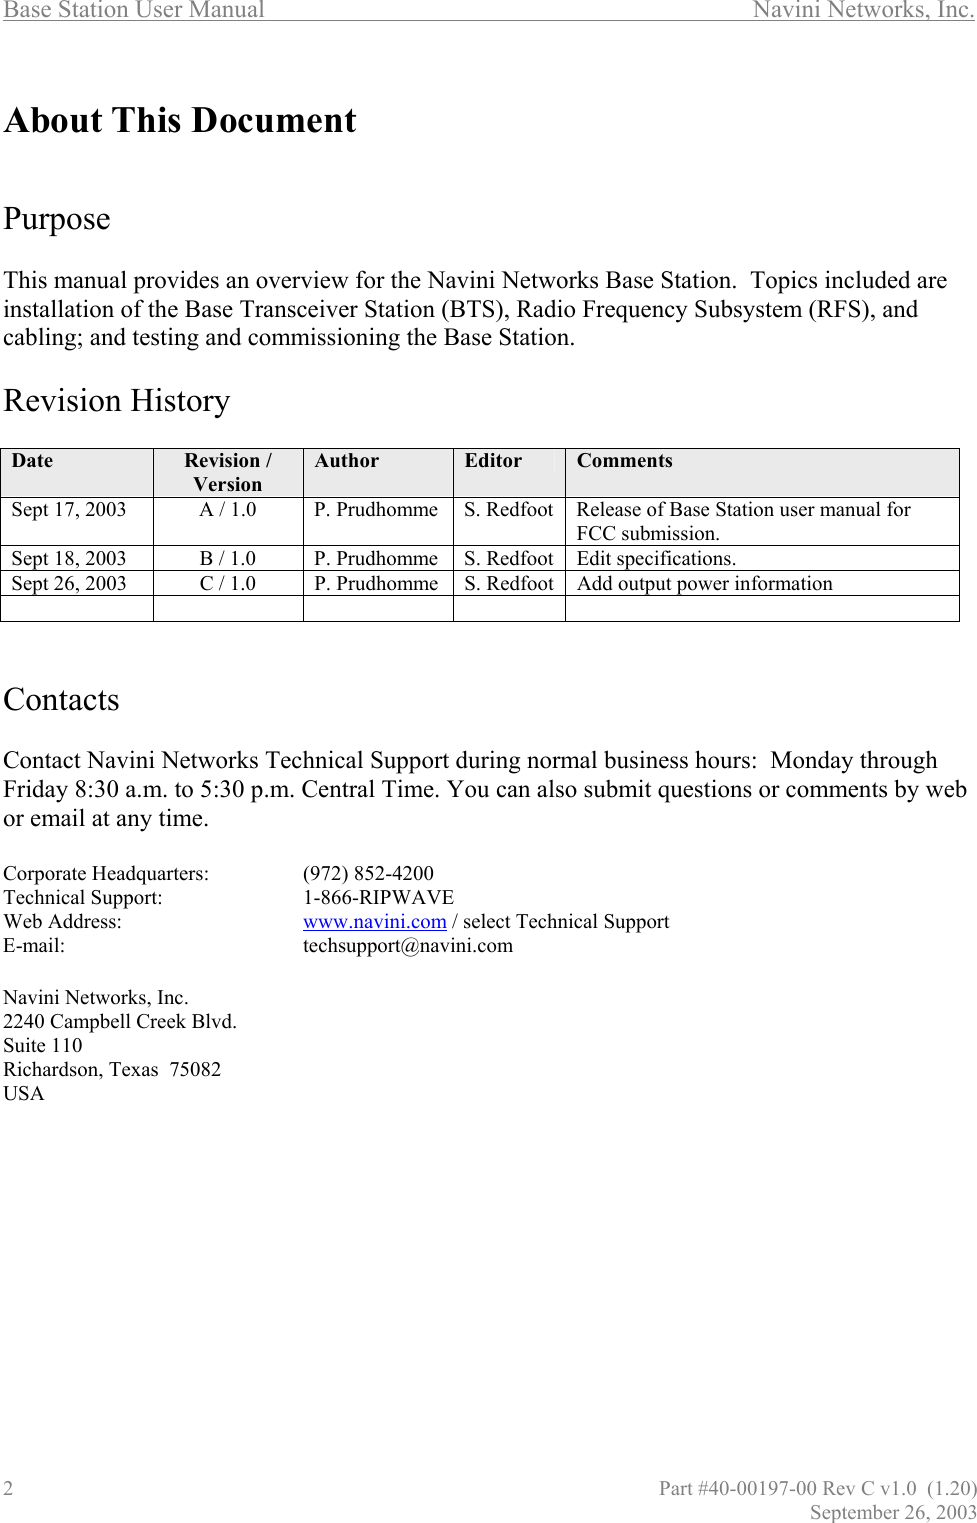 Base Station User Manual       Navini Networks, Inc.   About This Document     Purpose  This manual provides an overview for the Navini Networks Base Station.  Topics included are installation of the Base Transceiver Station (BTS), Radio Frequency Subsystem (RFS), and cabling; and testing and commissioning the Base Station.  Revision History  Date  Revision / Version Author  Editor  Comments Sept 17, 2003  A / 1.0  P. Prudhomme  S. Redfoot  Release of Base Station user manual for FCC submission. Sept 18, 2003  B / 1.0  P. Prudhomme  S. Redfoot  Edit specifications.   Sept 26, 2003  C / 1.0  P. Prudhomme  S. Redfoot  Add output power information        Contacts  Contact Navini Networks Technical Support during normal business hours:  Monday through Friday 8:30 a.m. to 5:30 p.m. Central Time. You can also submit questions or comments by web or email at any time.  Corporate Headquarters:    (972) 852-4200 Technical Support:    1-866-RIPWAVE Web Address:      www.navini.com / select Technical Support E-mail:    techsupport@navini.com  Navini Networks, Inc. 2240 Campbell Creek Blvd. Suite 110 Richardson, Texas  75082 USA 2                                       Part #40-00197-00 Rev C v1.0  (1.20) September 26, 2003 